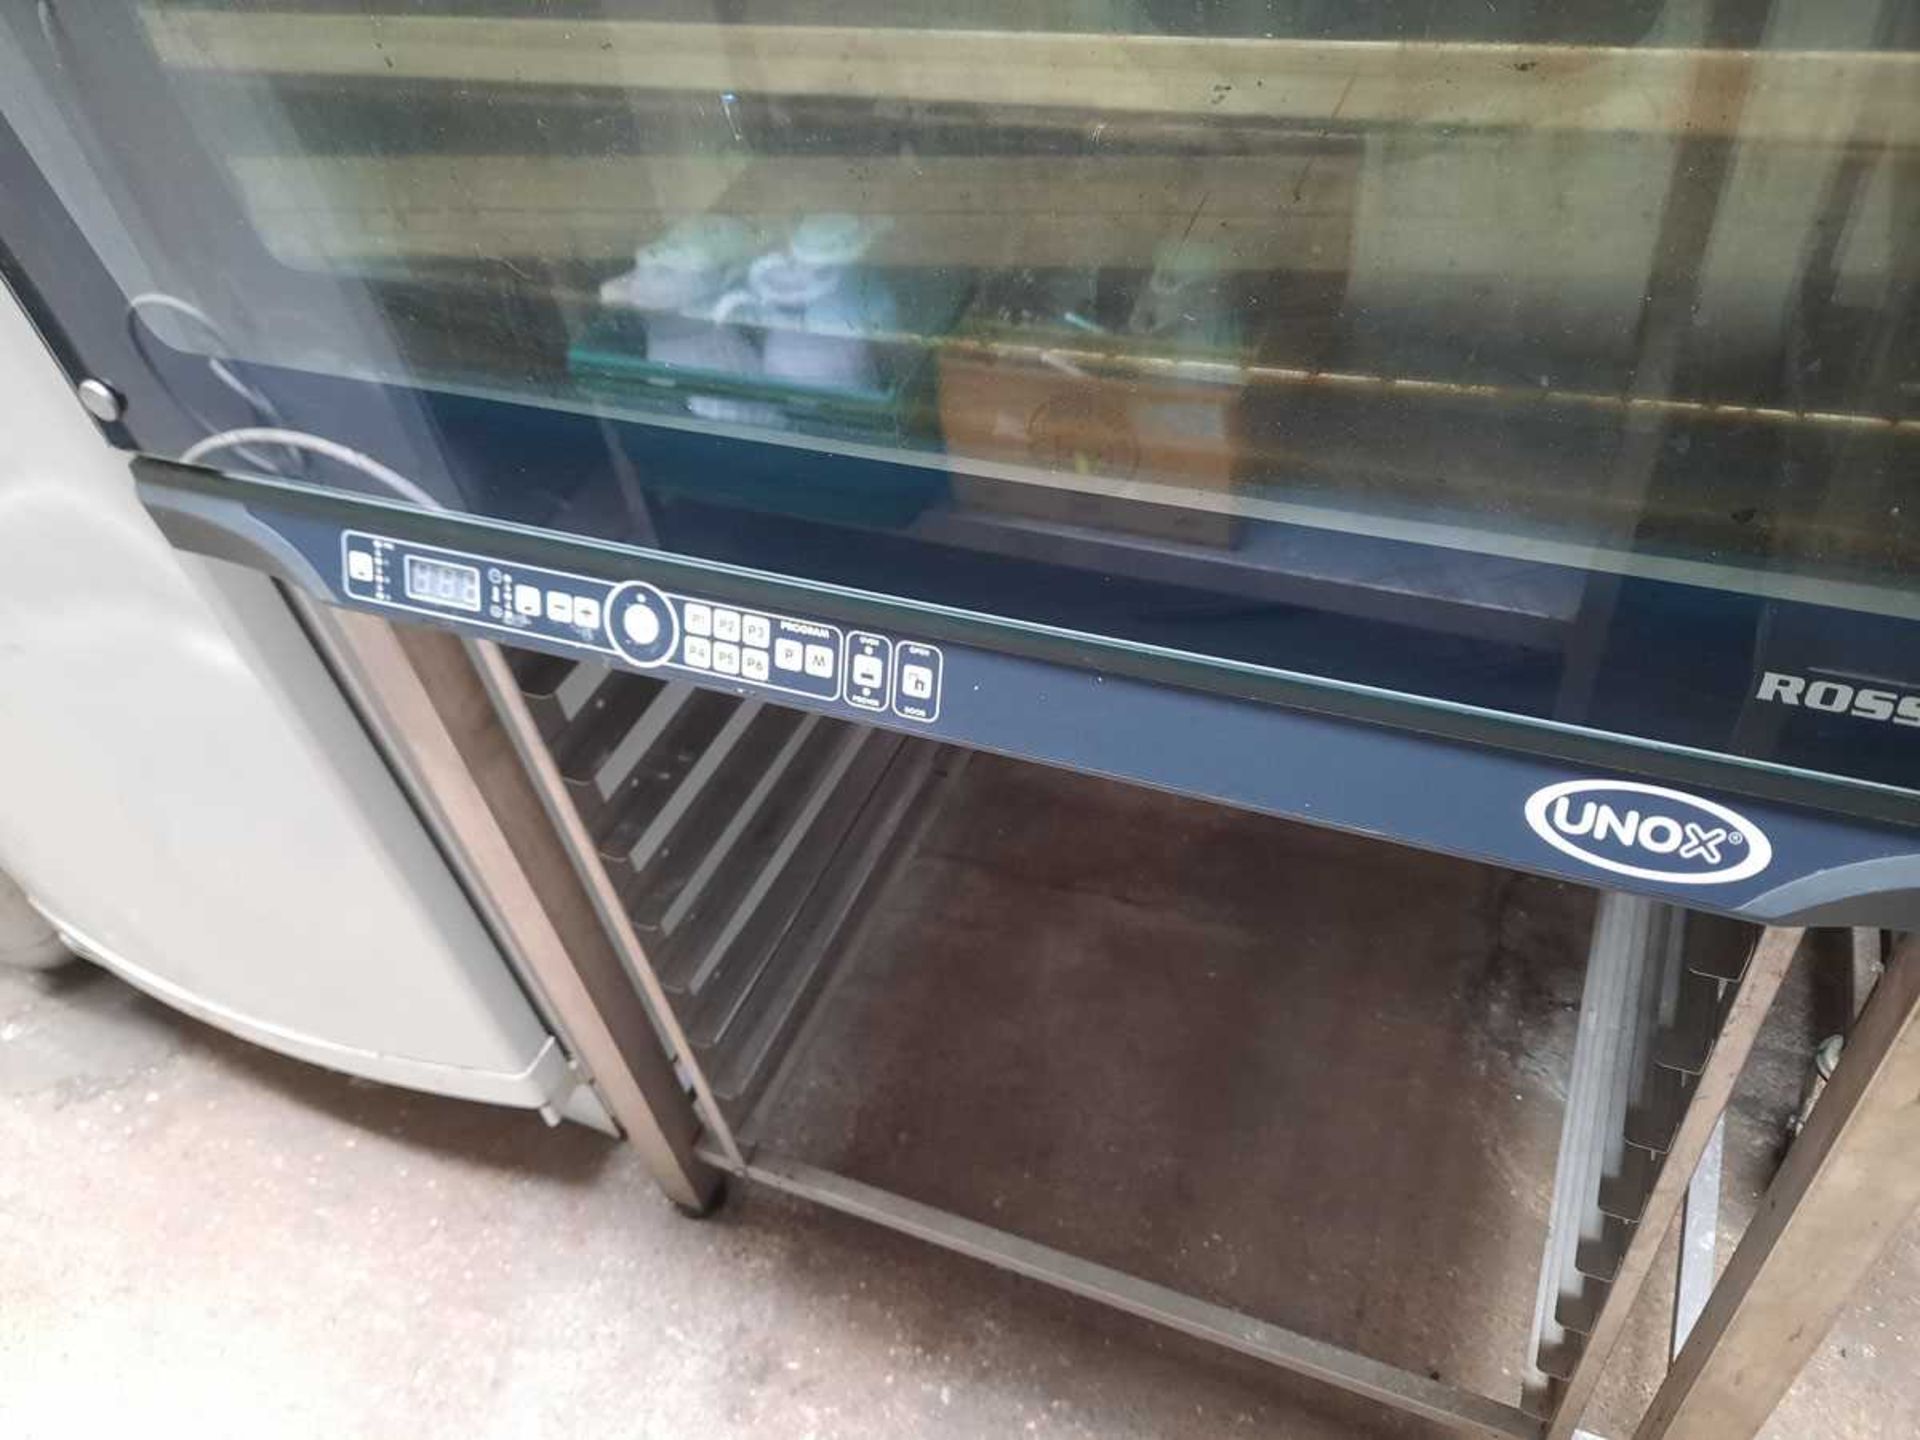 80cm Electric Unox Rossella Oven on stand - Image 2 of 2